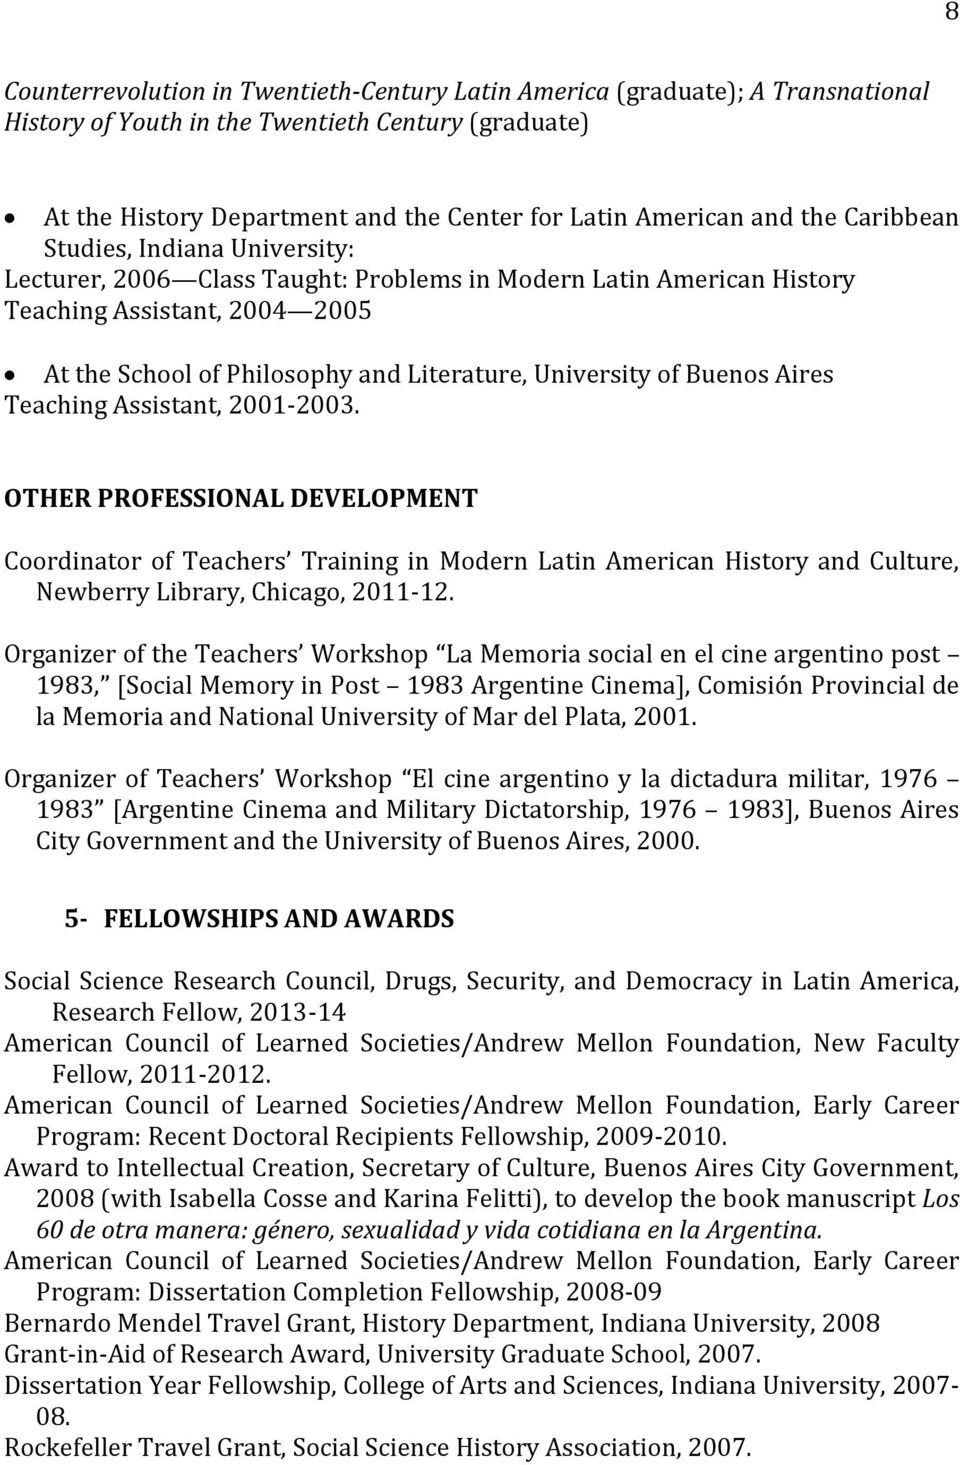 of Buenos Aires Teaching Assistant, 2001-2003. OTHER PROFESSIONAL DEVELOPMENT Coordinator of Teachers Training in Modern Latin American History and Culture, Newberry Library, Chicago, 2011-12.